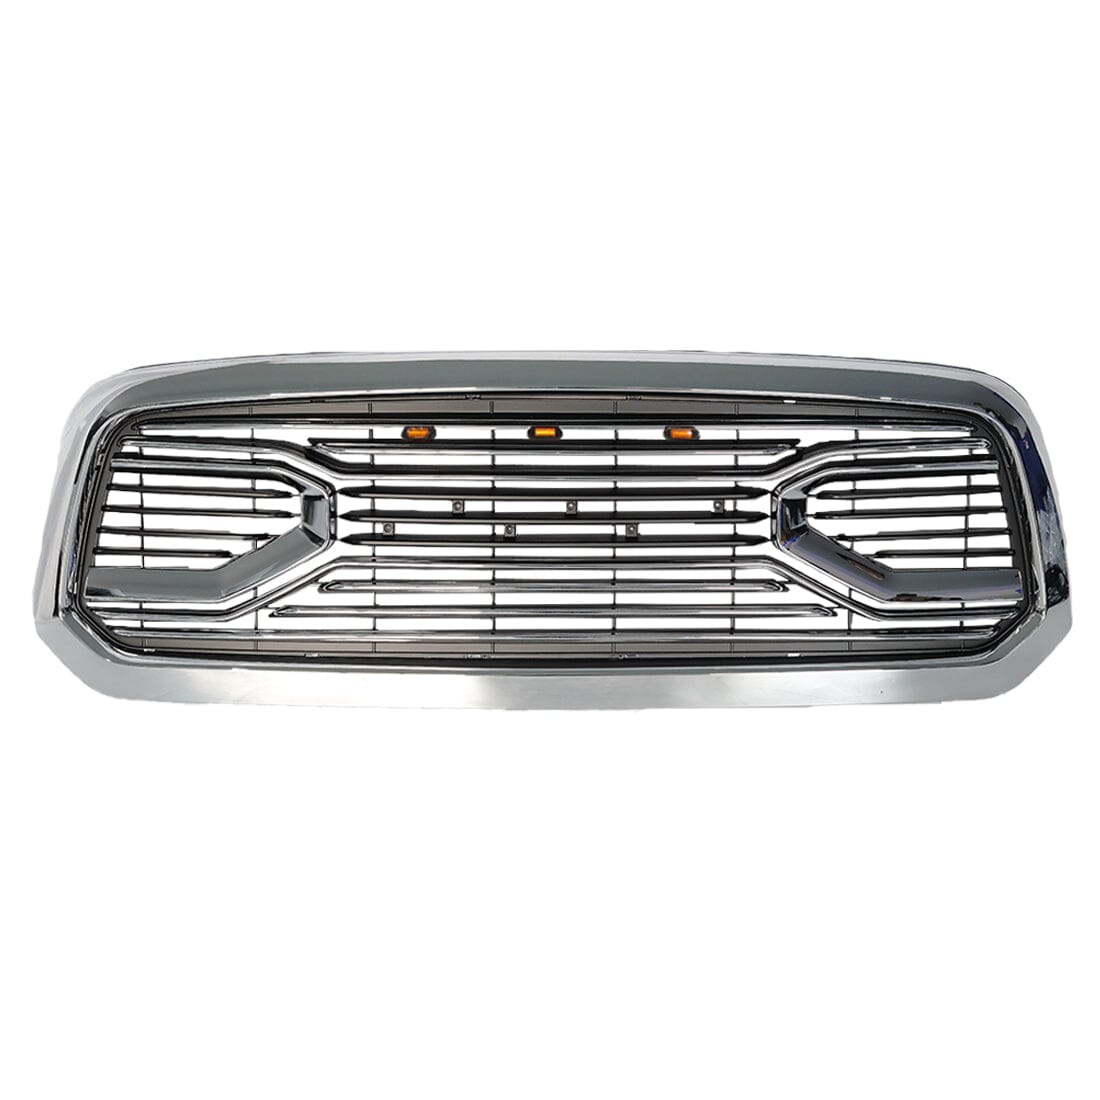 Chrome Big Horn Style Front Grille W/Amber For 2013-2018 Dodge Ram 1500| Amoffroad